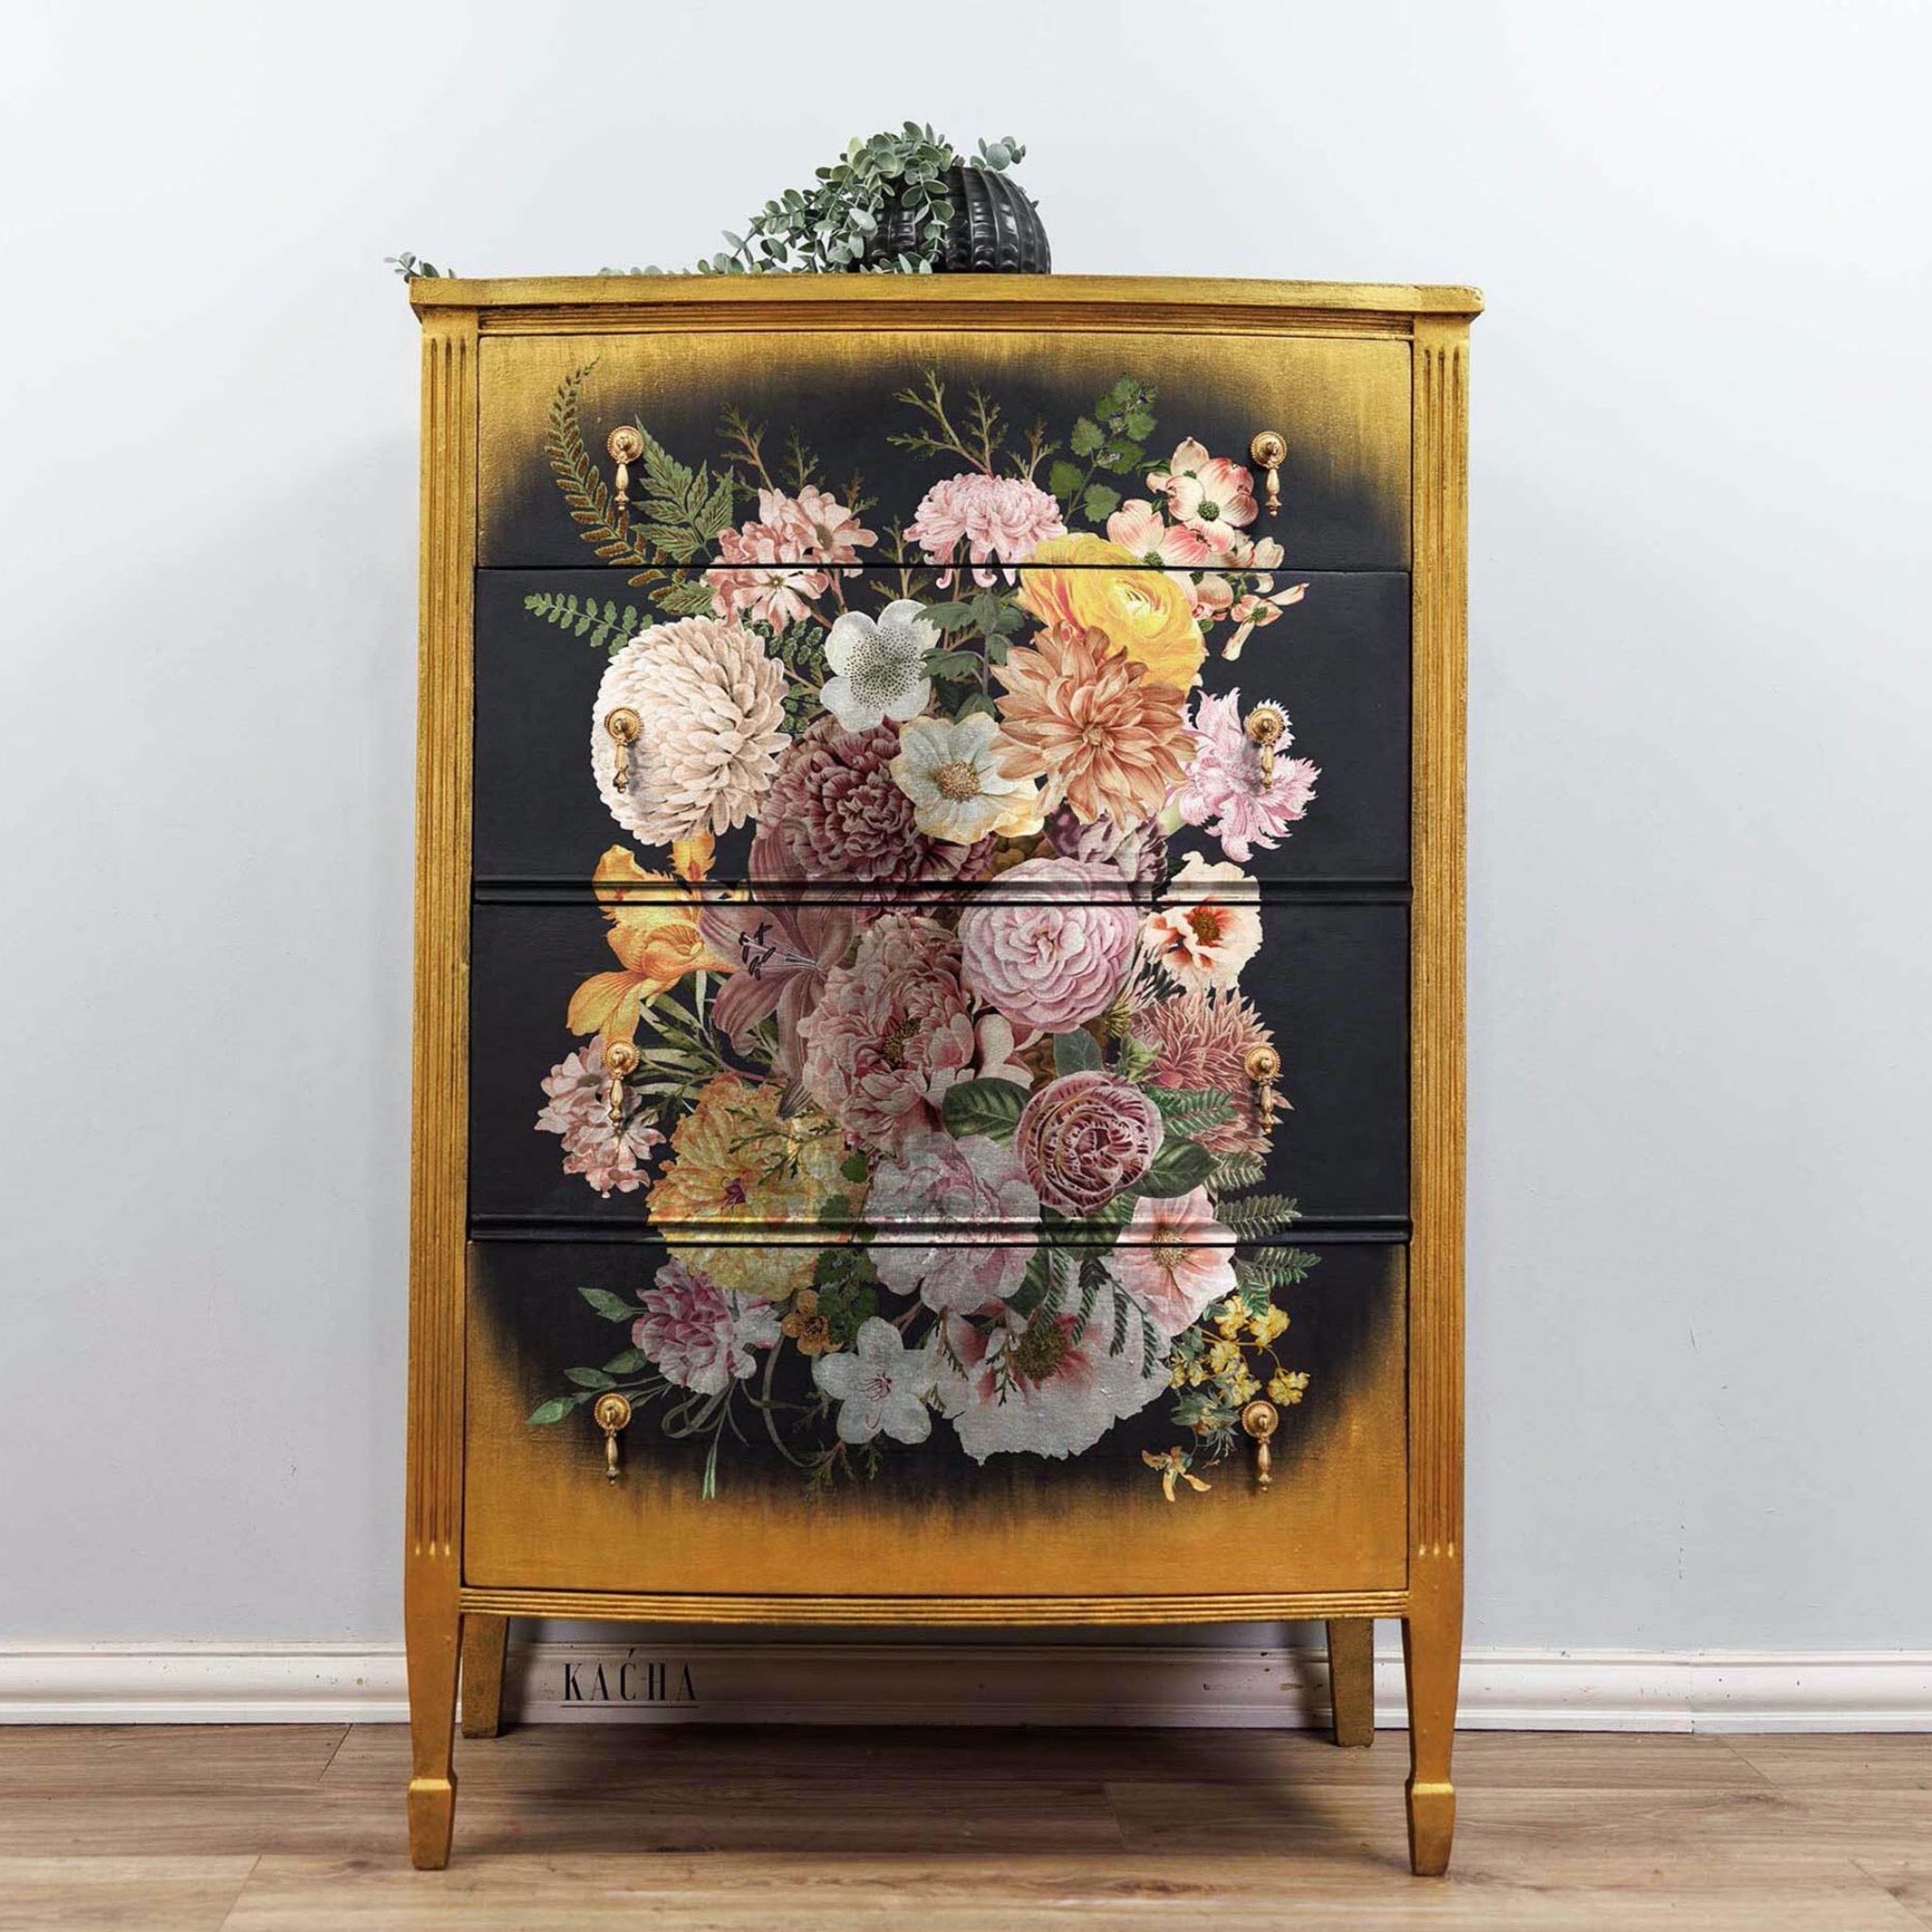 A 4-drawer chest dresser refurbished by Kacha is stained a natural wood color. The center of the front of the drawers is painted black with soft edges and features ReDesign with Prima's Kacha Woodland Floral transfer.